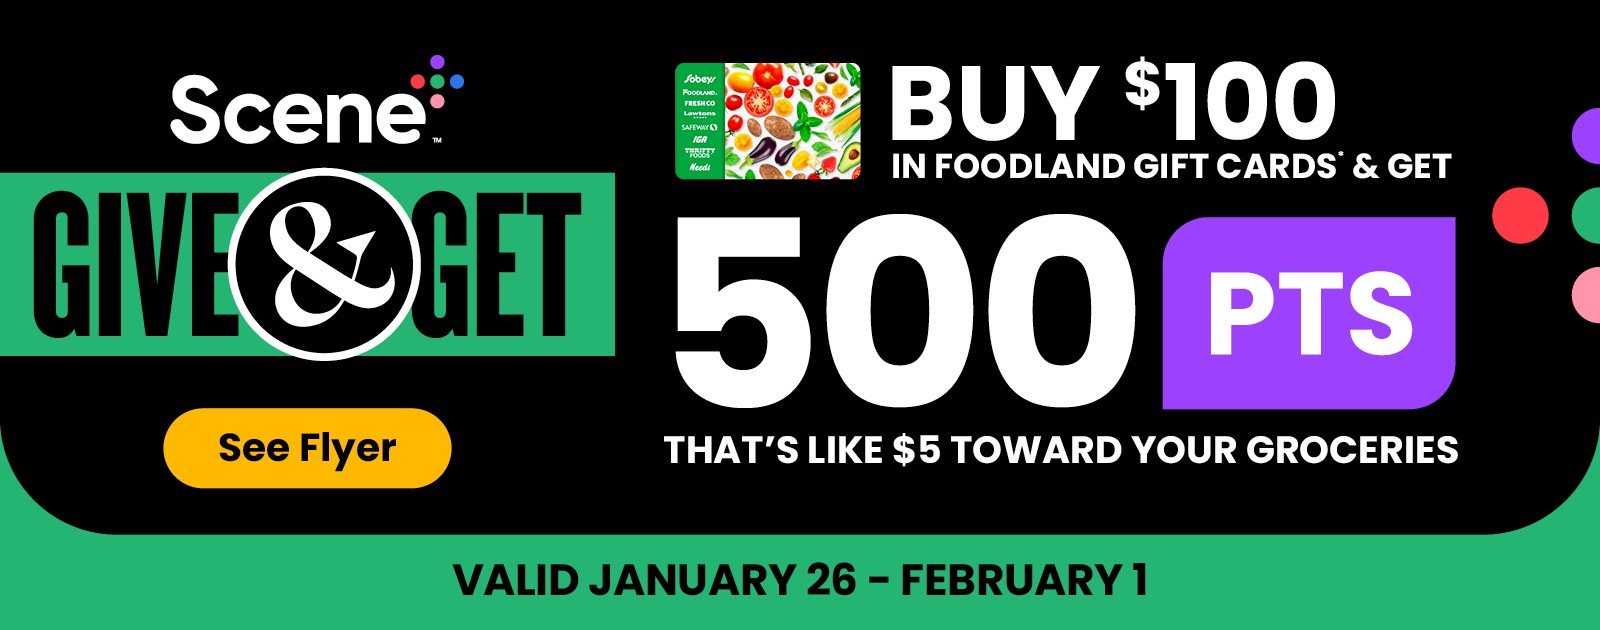 Scene+ Give & Get. Buy $100 in Foodland Gift Cards and get 500 Scene+ points. Valid January 26 to February 1. Get coupon.